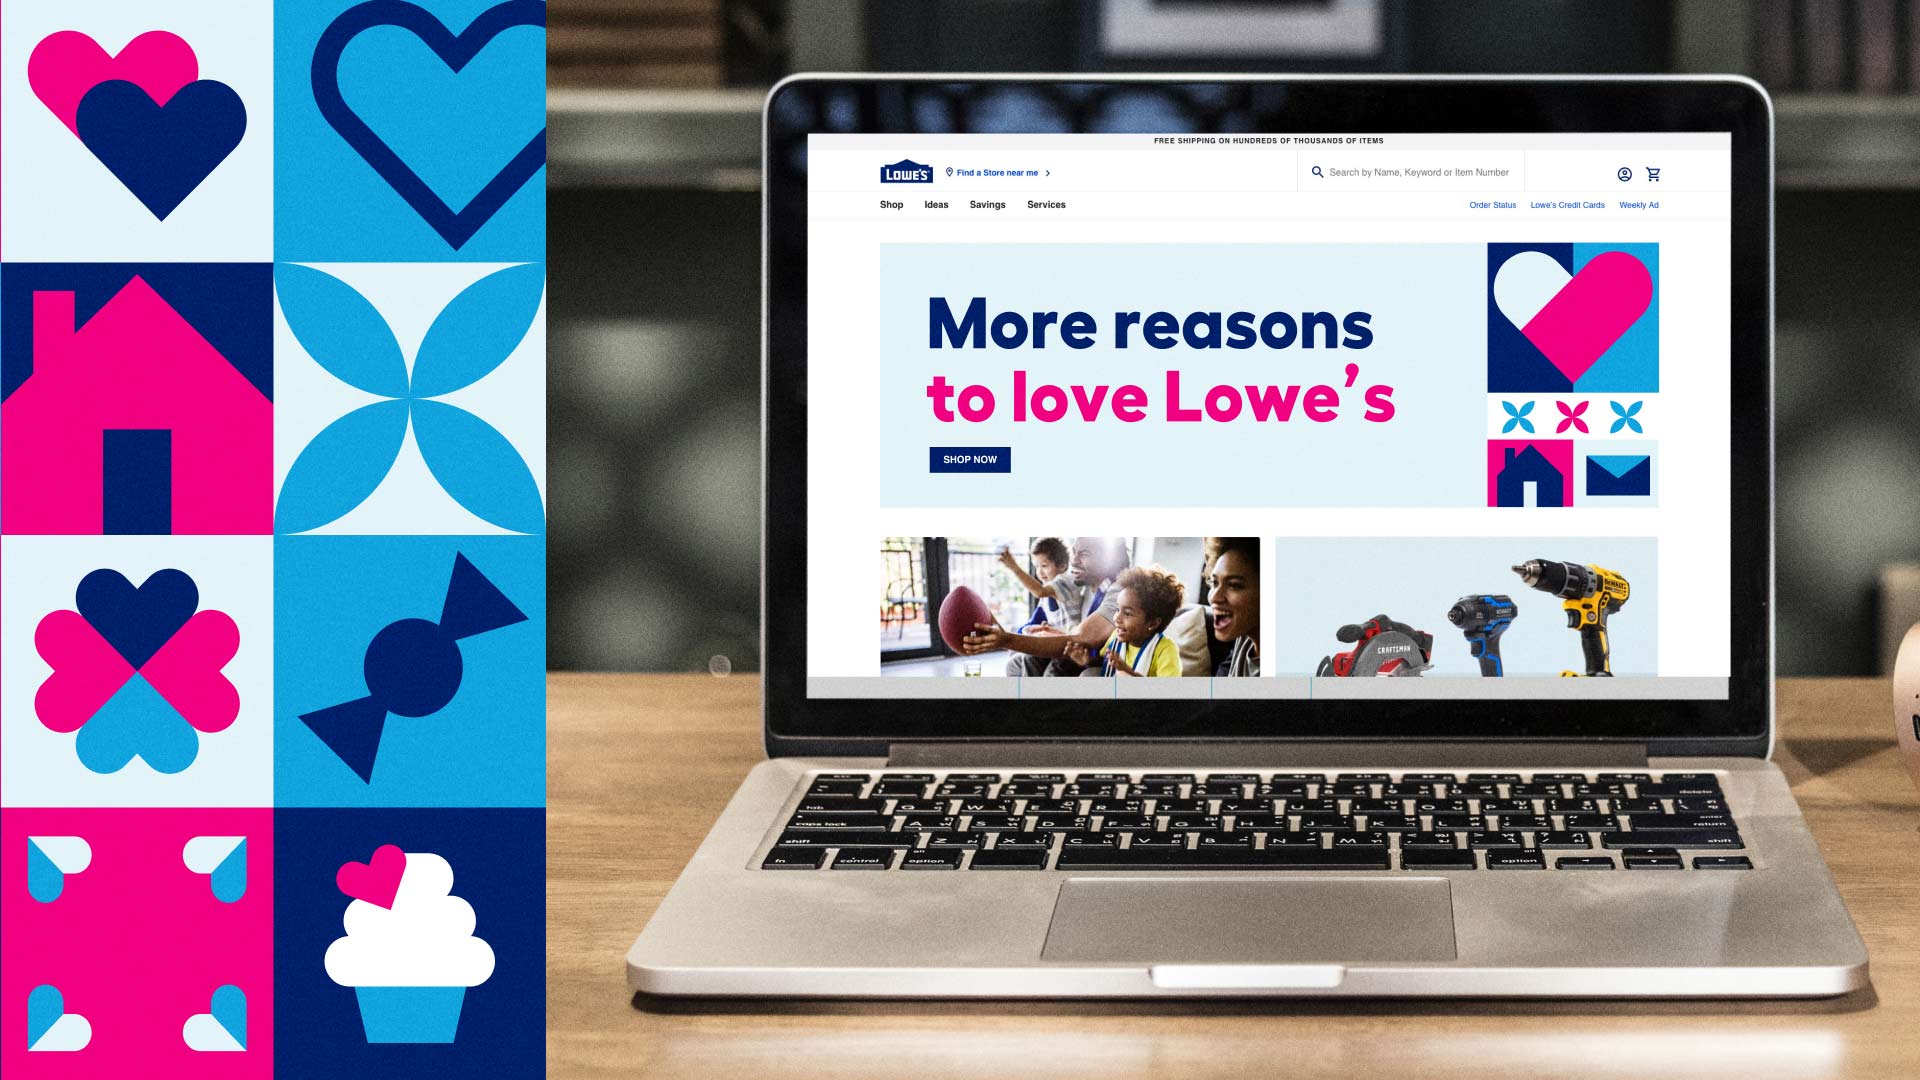 Blue and pink illustrations decorating the web page with a headline saying More Reasons to Love Lowe's